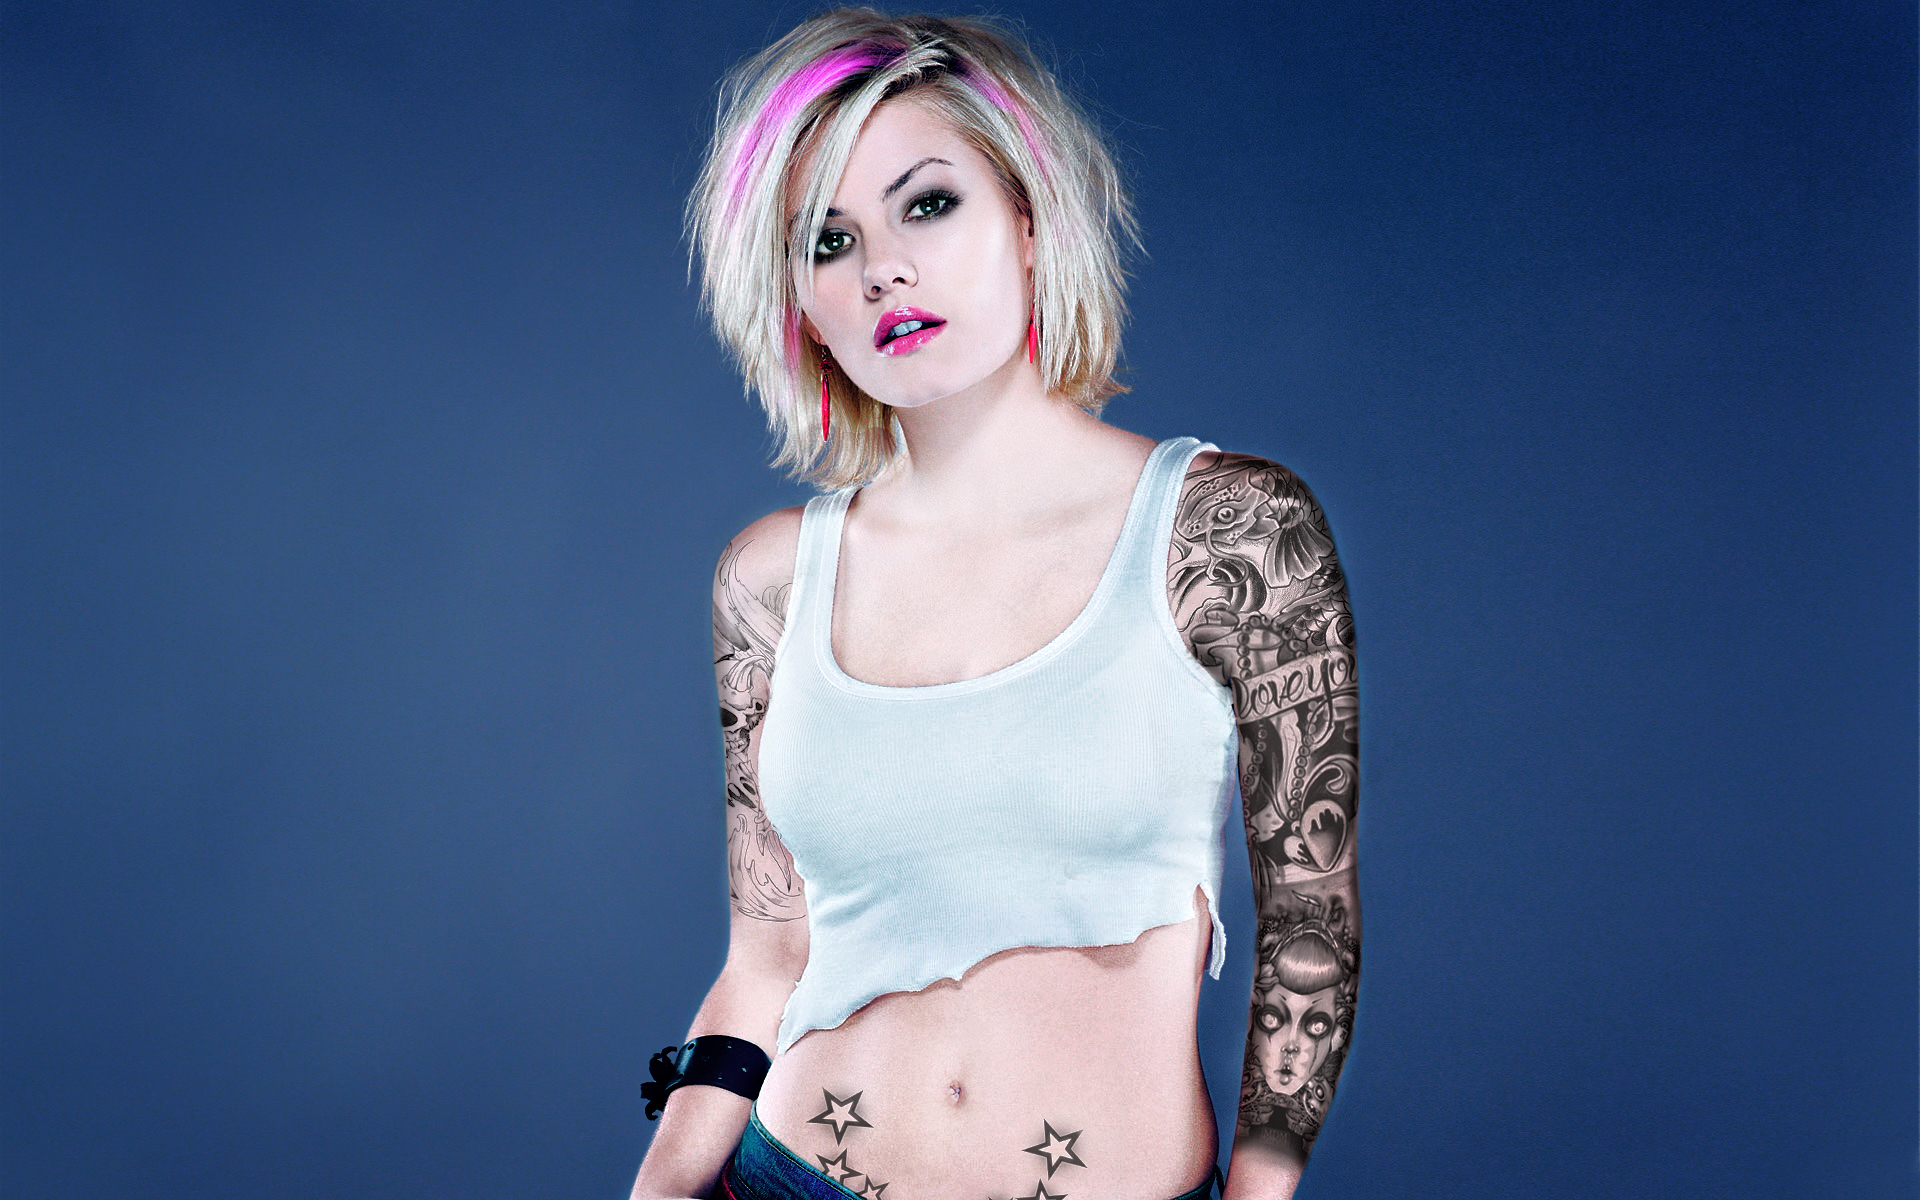 _Rebel_girl_with_a_tattoo_on_his_arm_and_abdomen_078436_.jpg